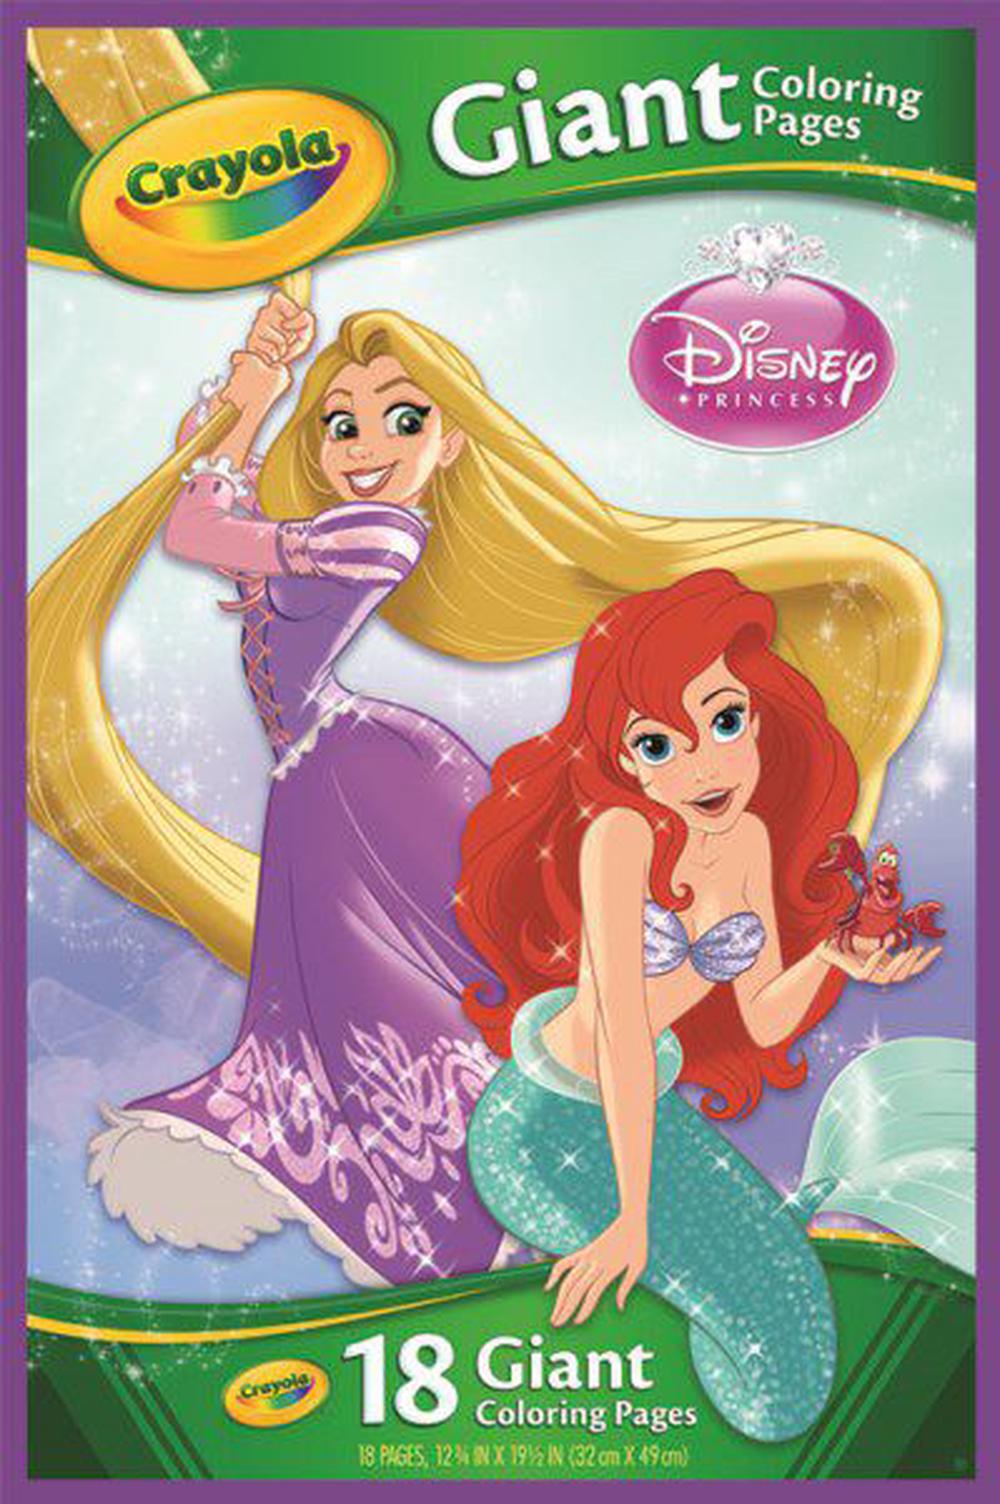 Crayola Disney Princess Giant Colouring Pages Buy online